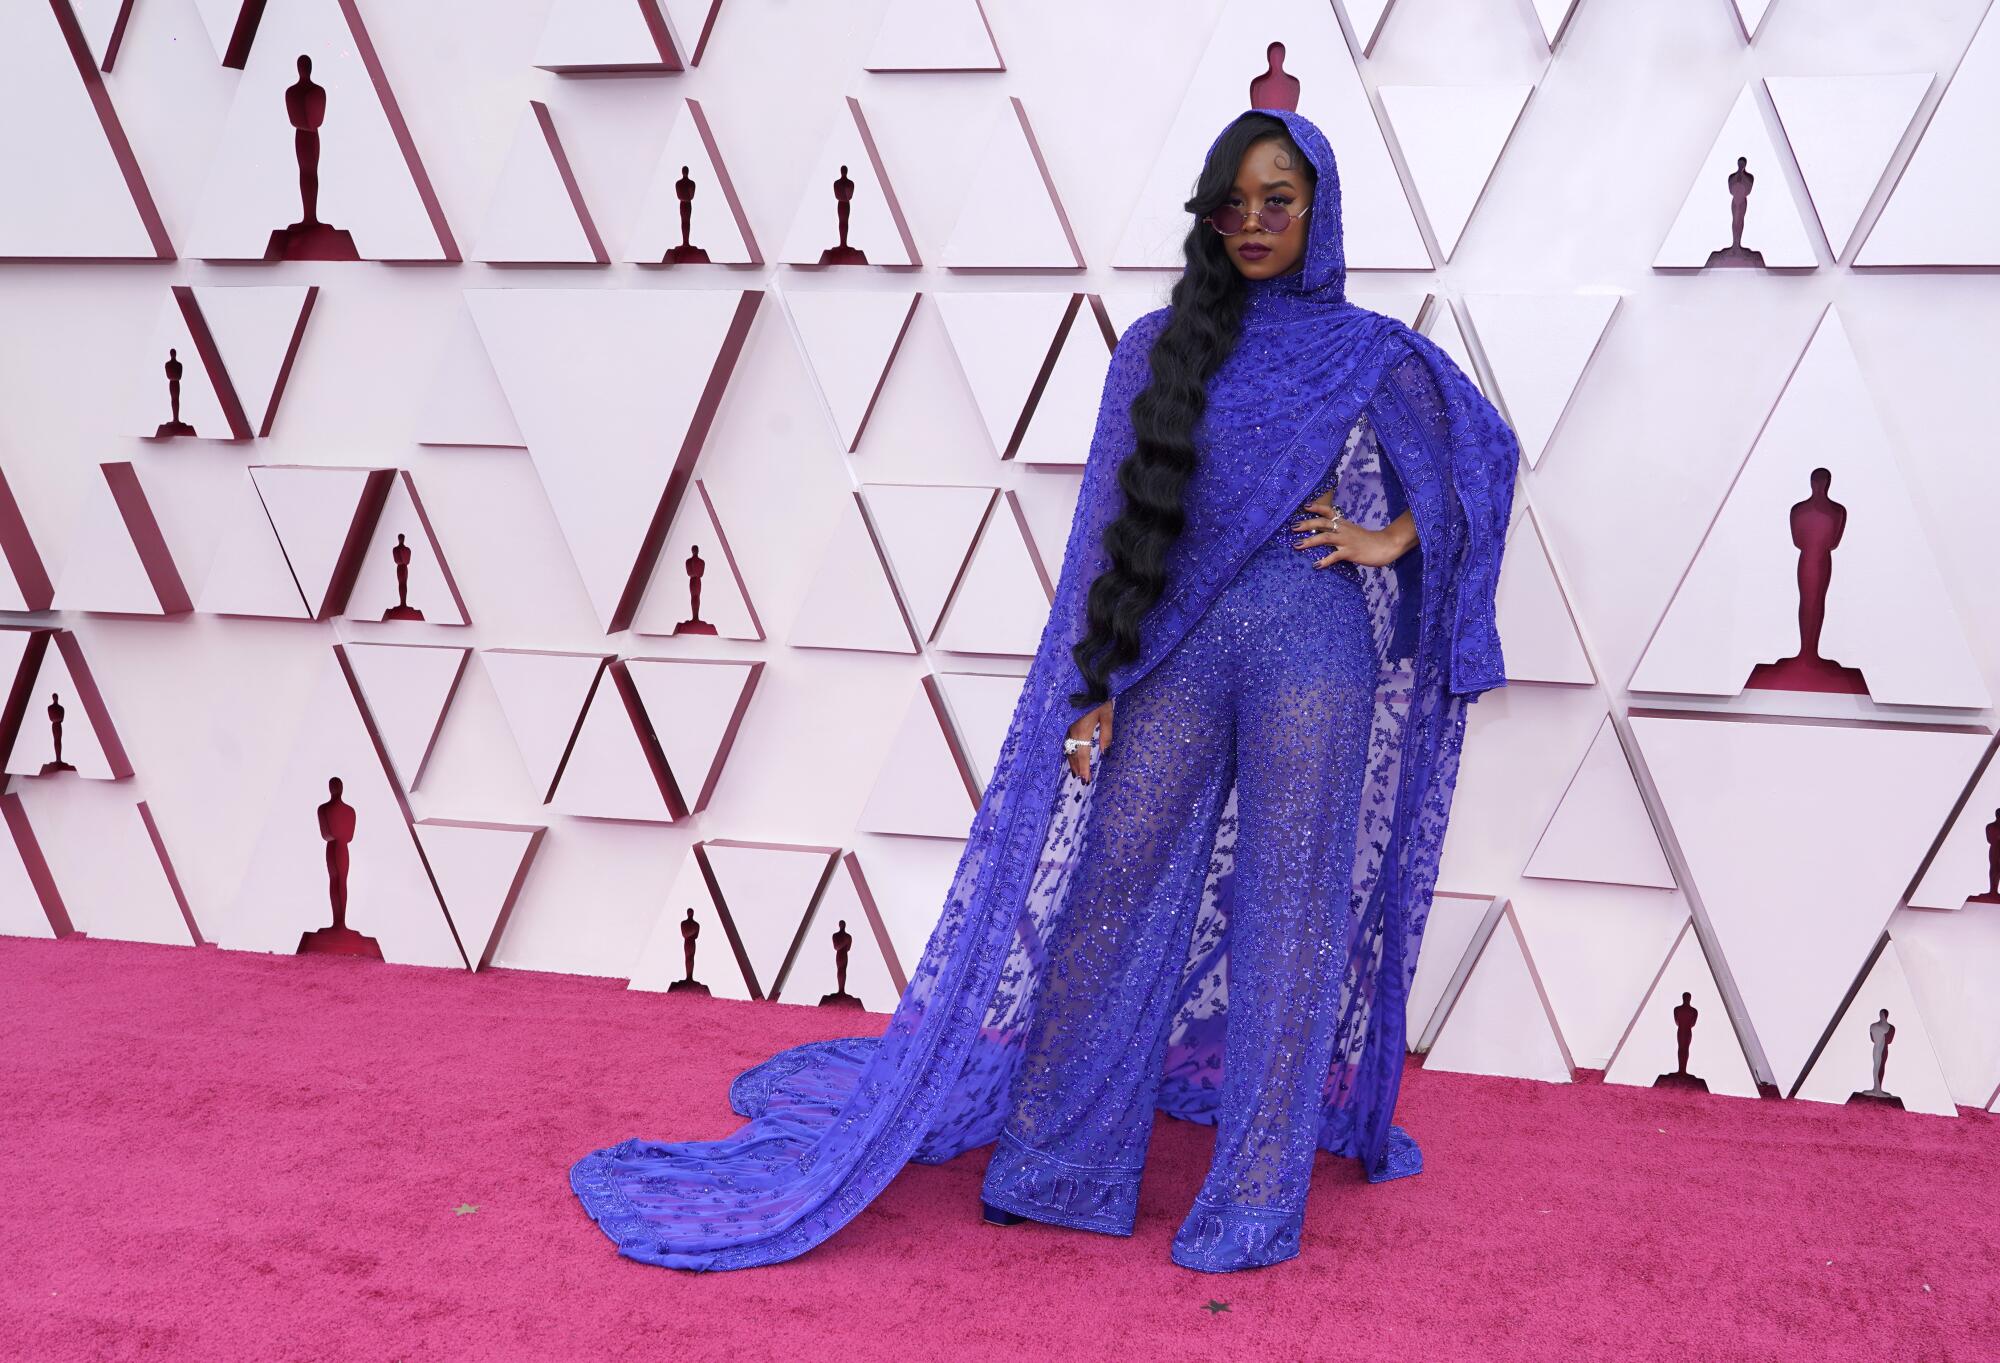 H.E.R. in a lacy, violet sari-style outfit from Dundas.